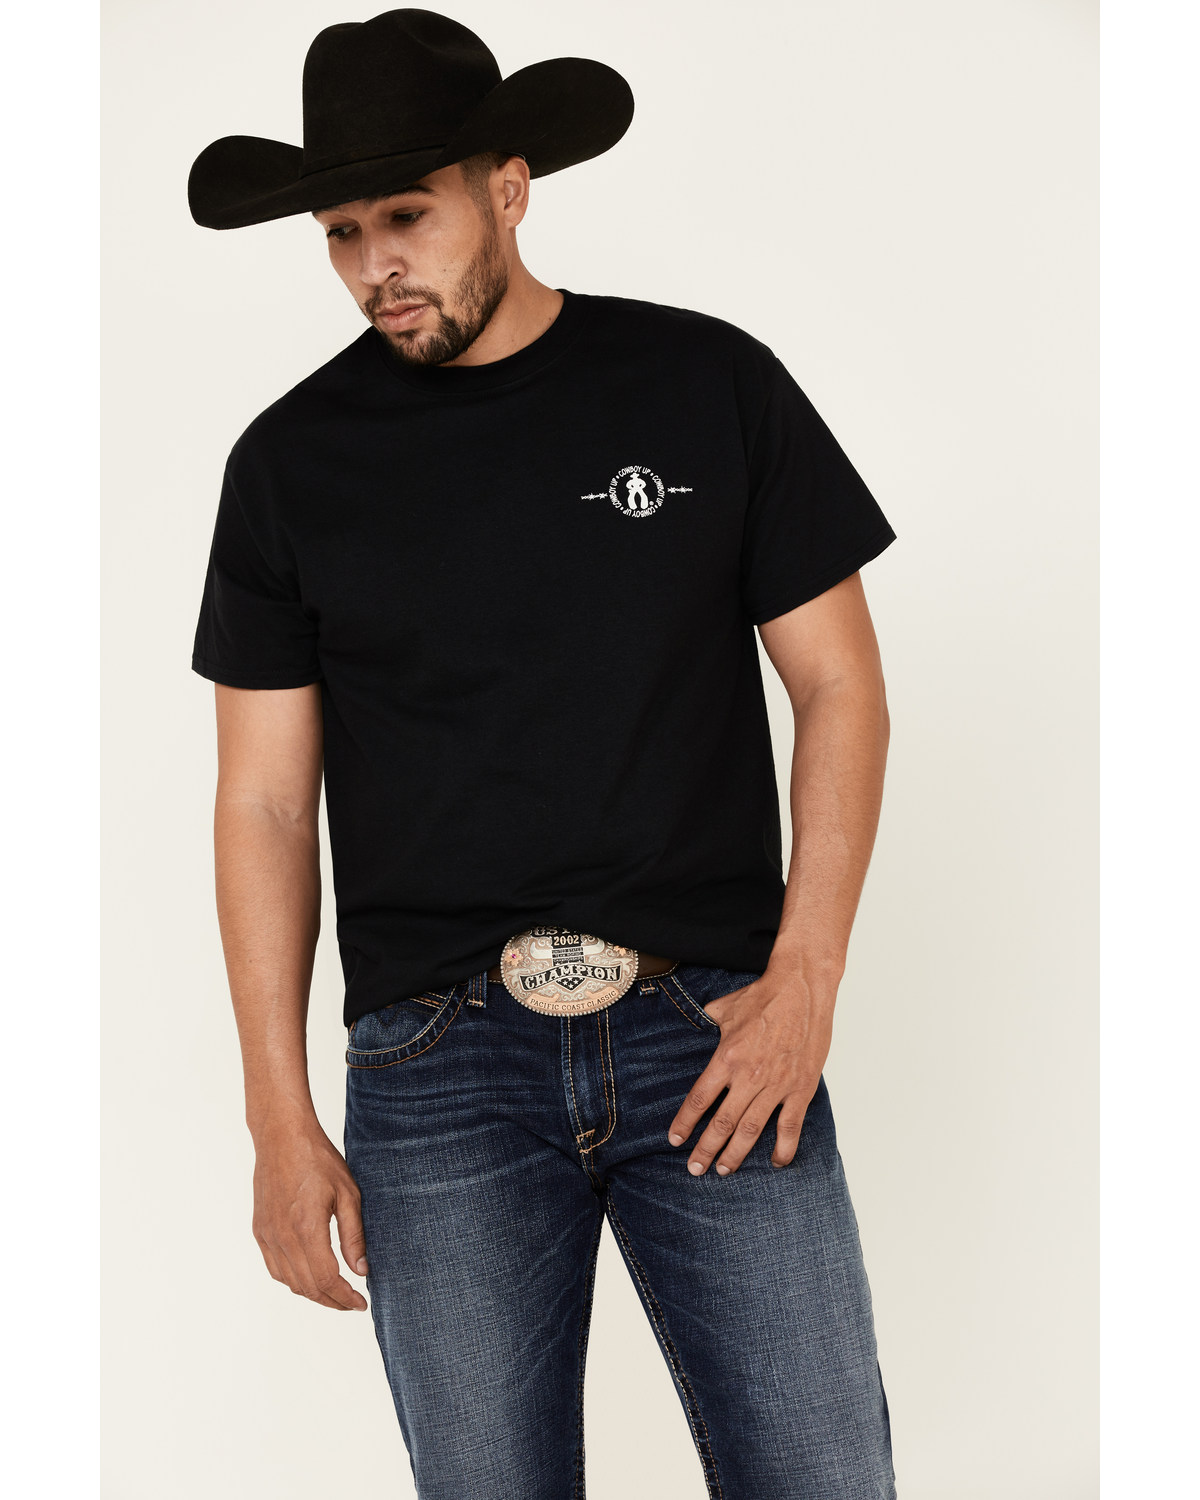 Cowboy Up Men's I Bleed Red White & Blue Short Sleeve Graphic T-Shirt